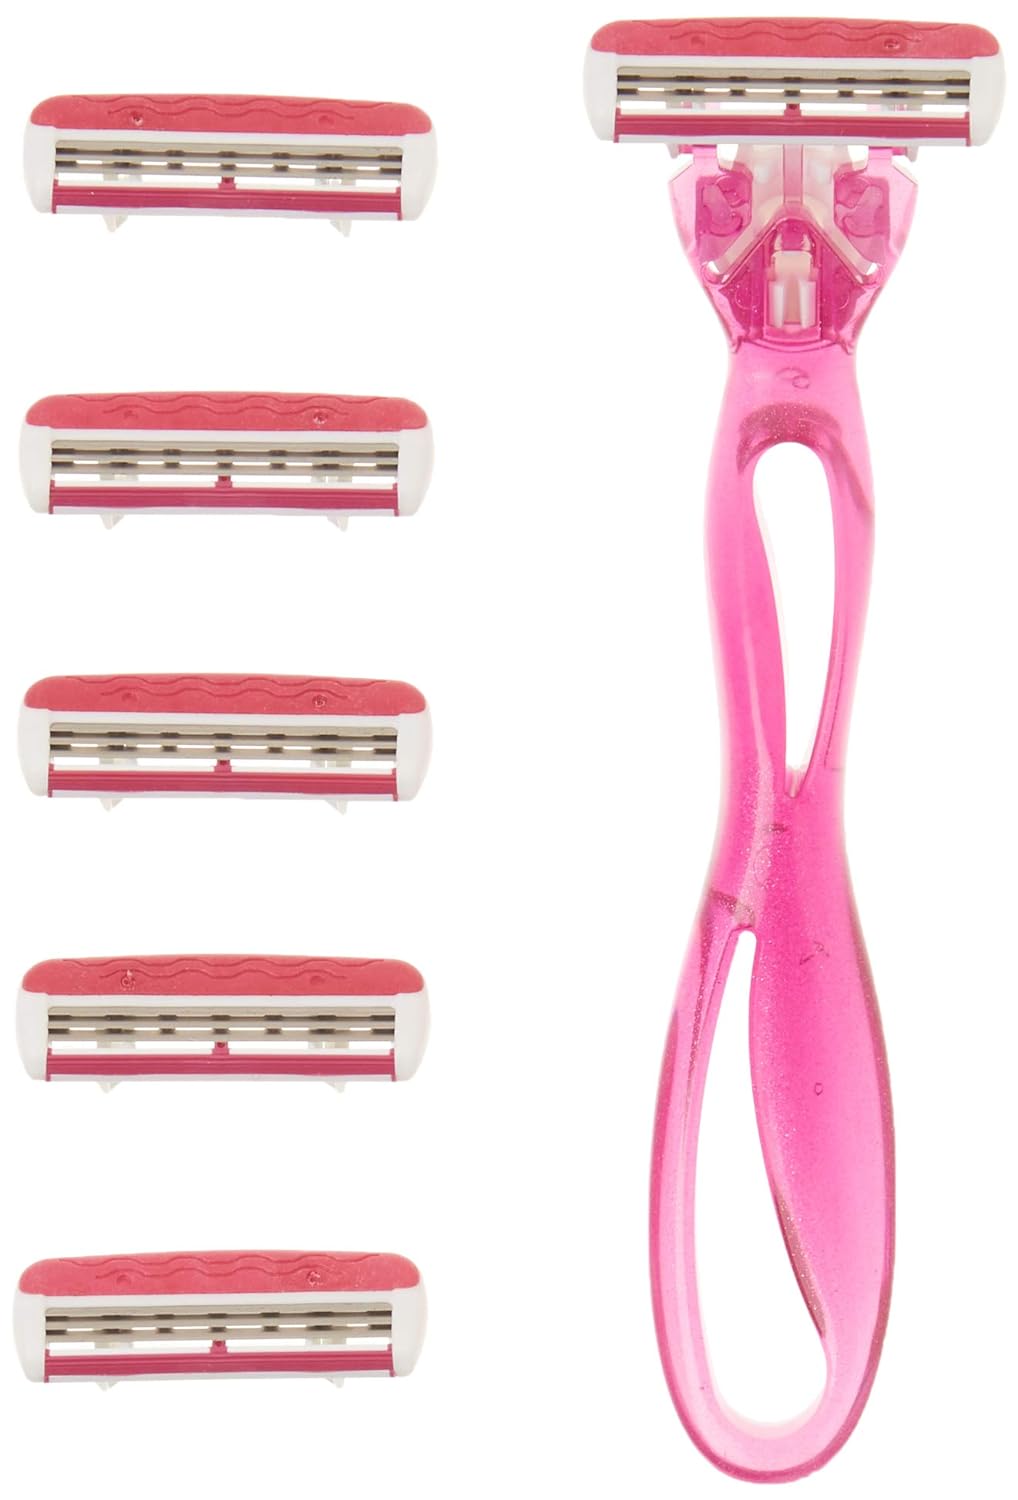 BIC Click 3 Soleil Women' Disposable Razors, 3 Blades With a Moisture Strip For a Smoother Shave, 12 Piece Razor Set